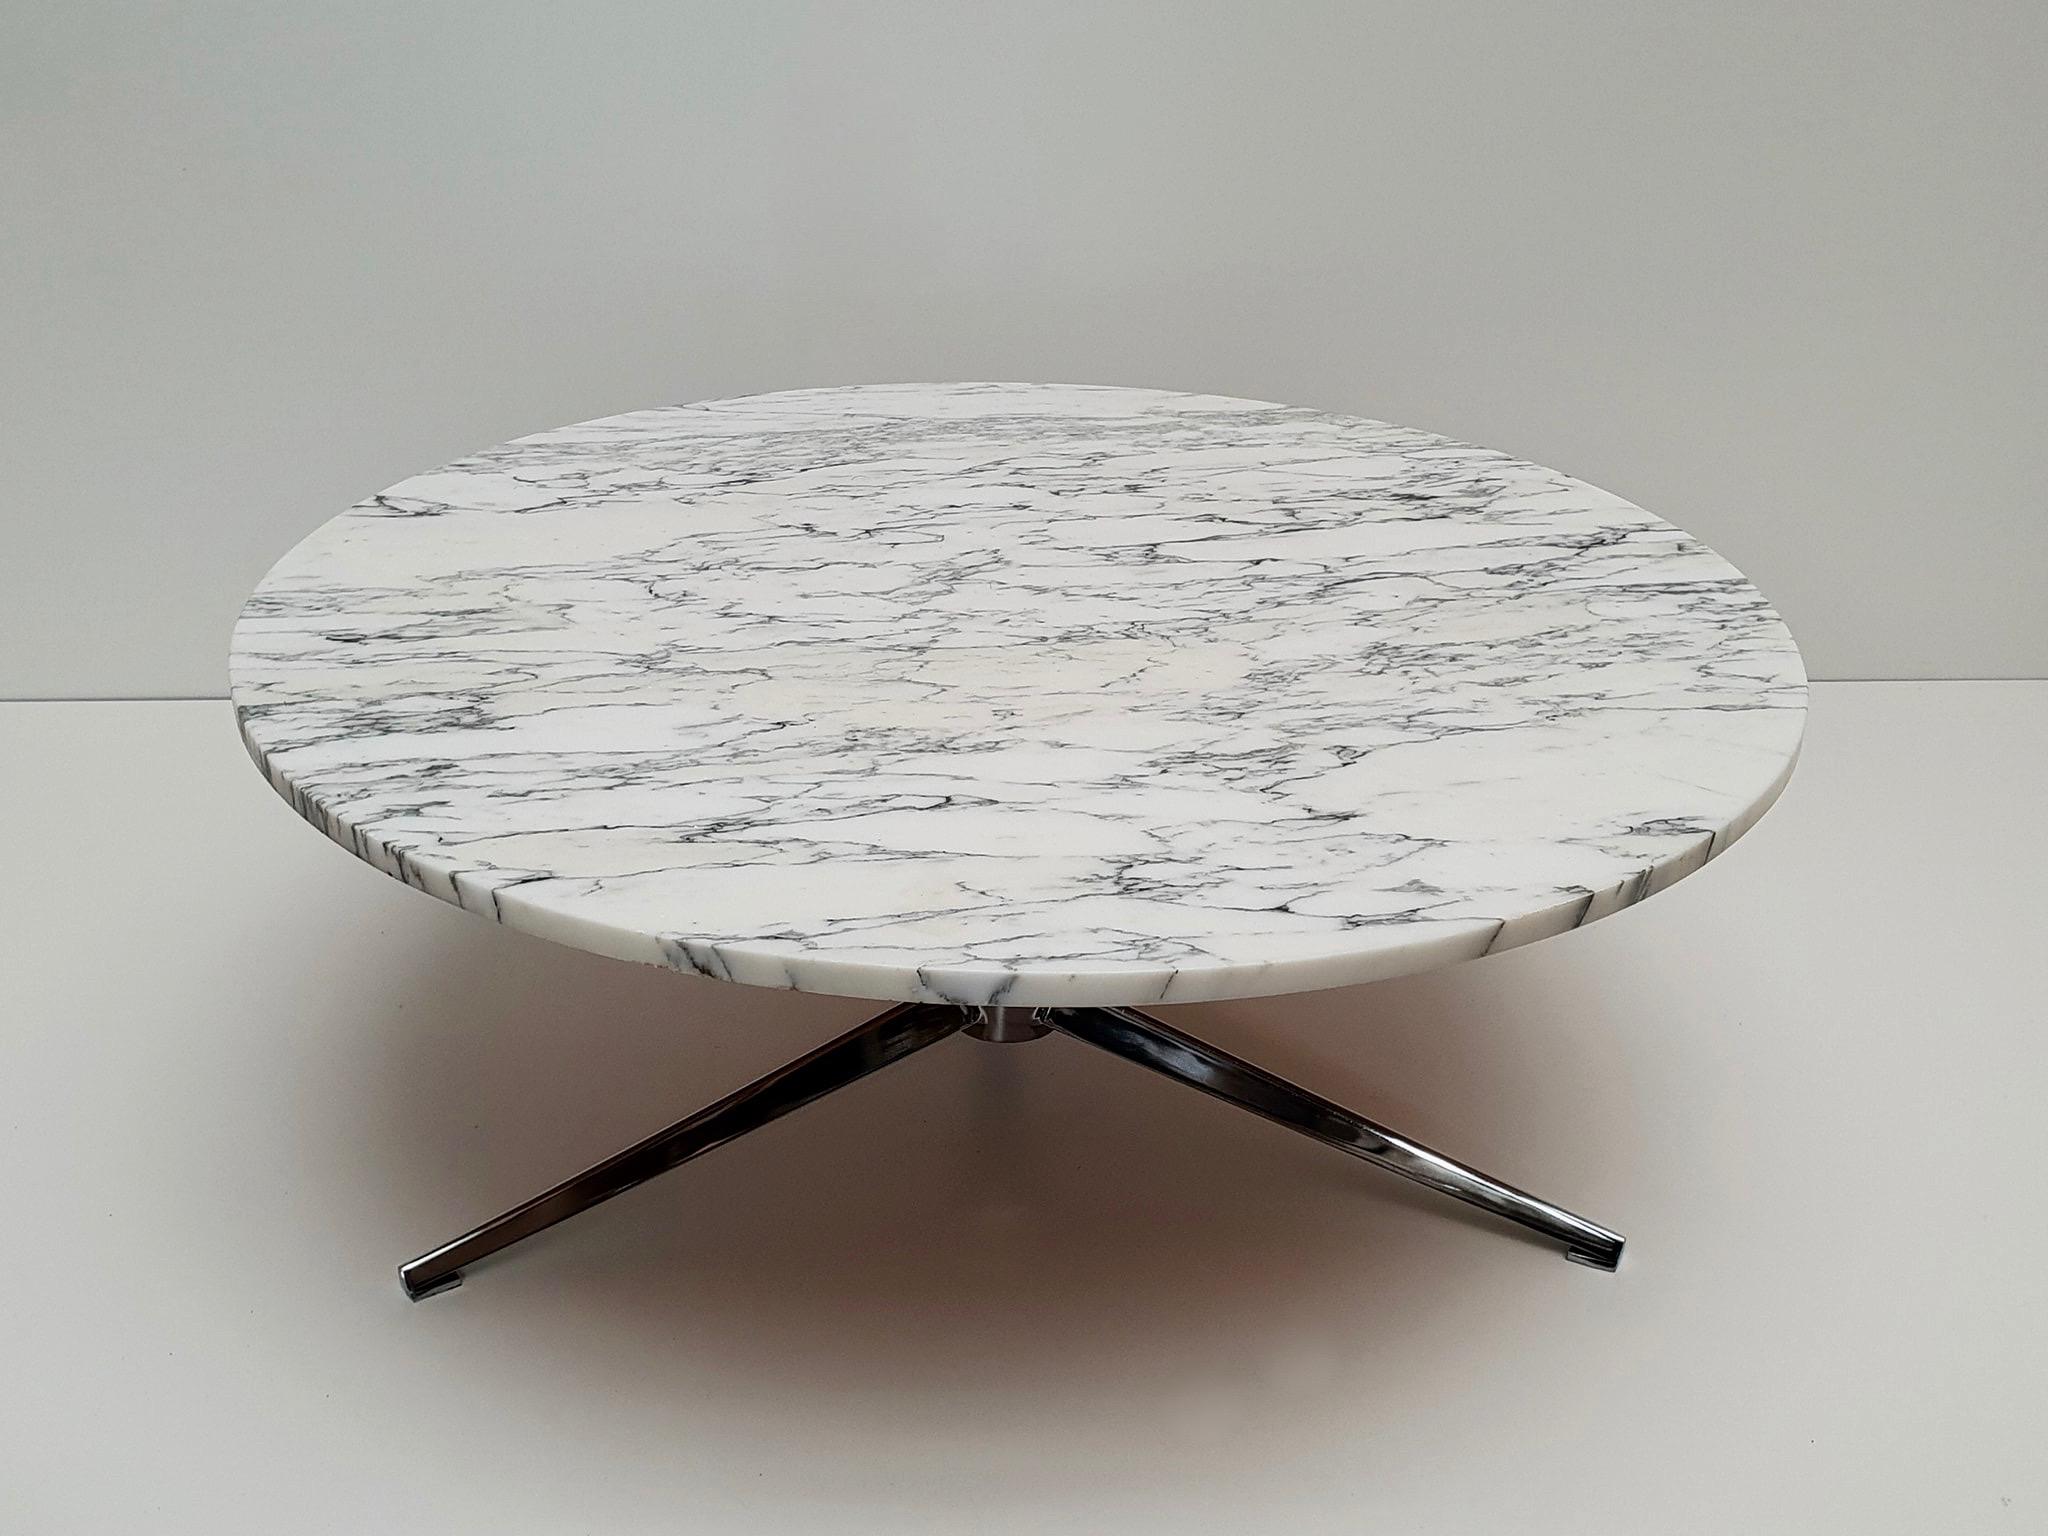 Midcentury Italian Modern Polished Metal and Marble Round Circular Coffee Table 1